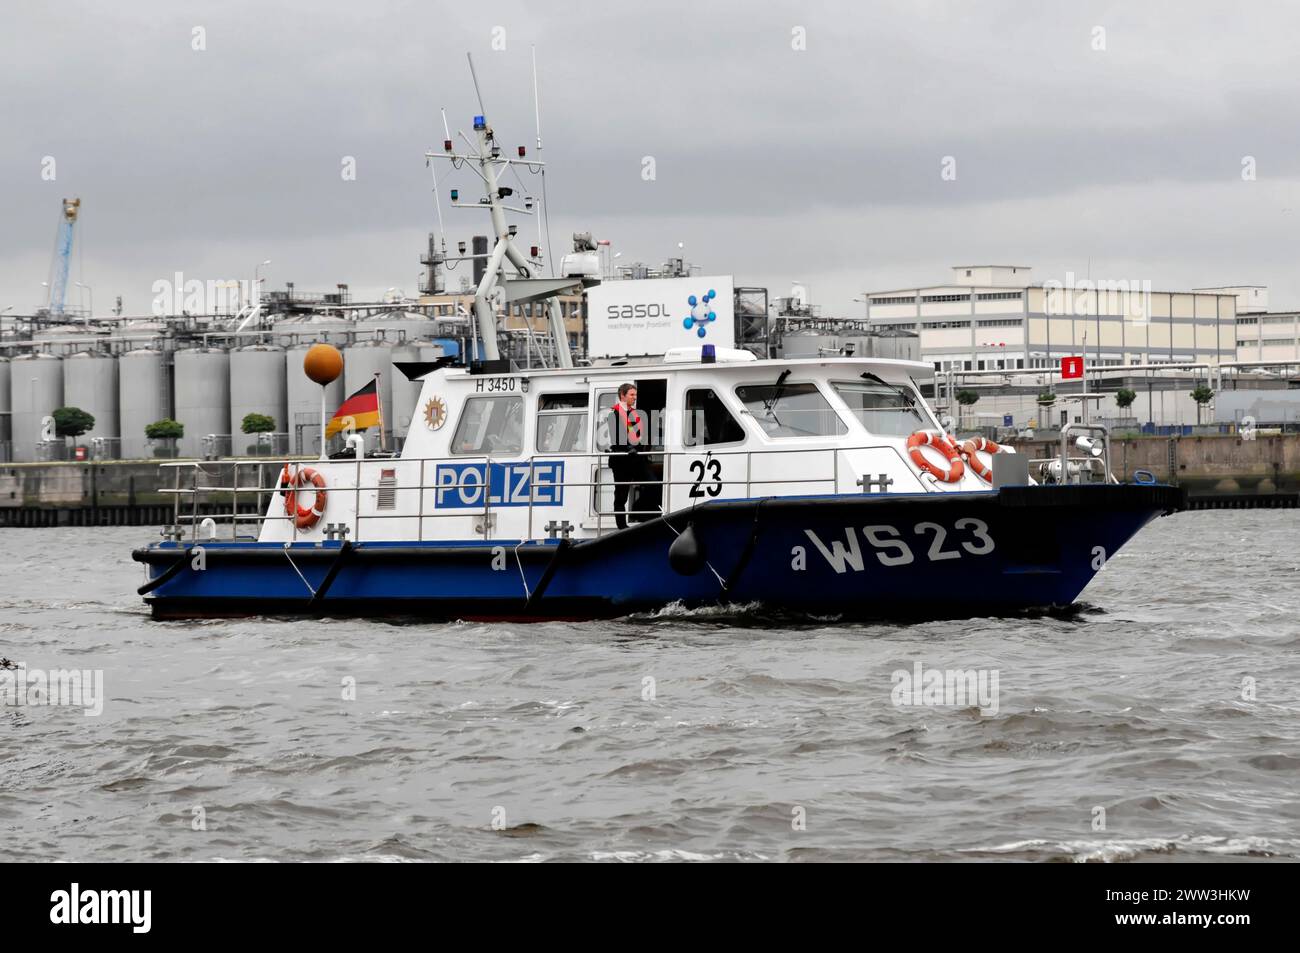 Police boat on the water with crew and cloudy sky in the background, Hamburg, Hanseatic City of Hamburg, Germany Stock Photo